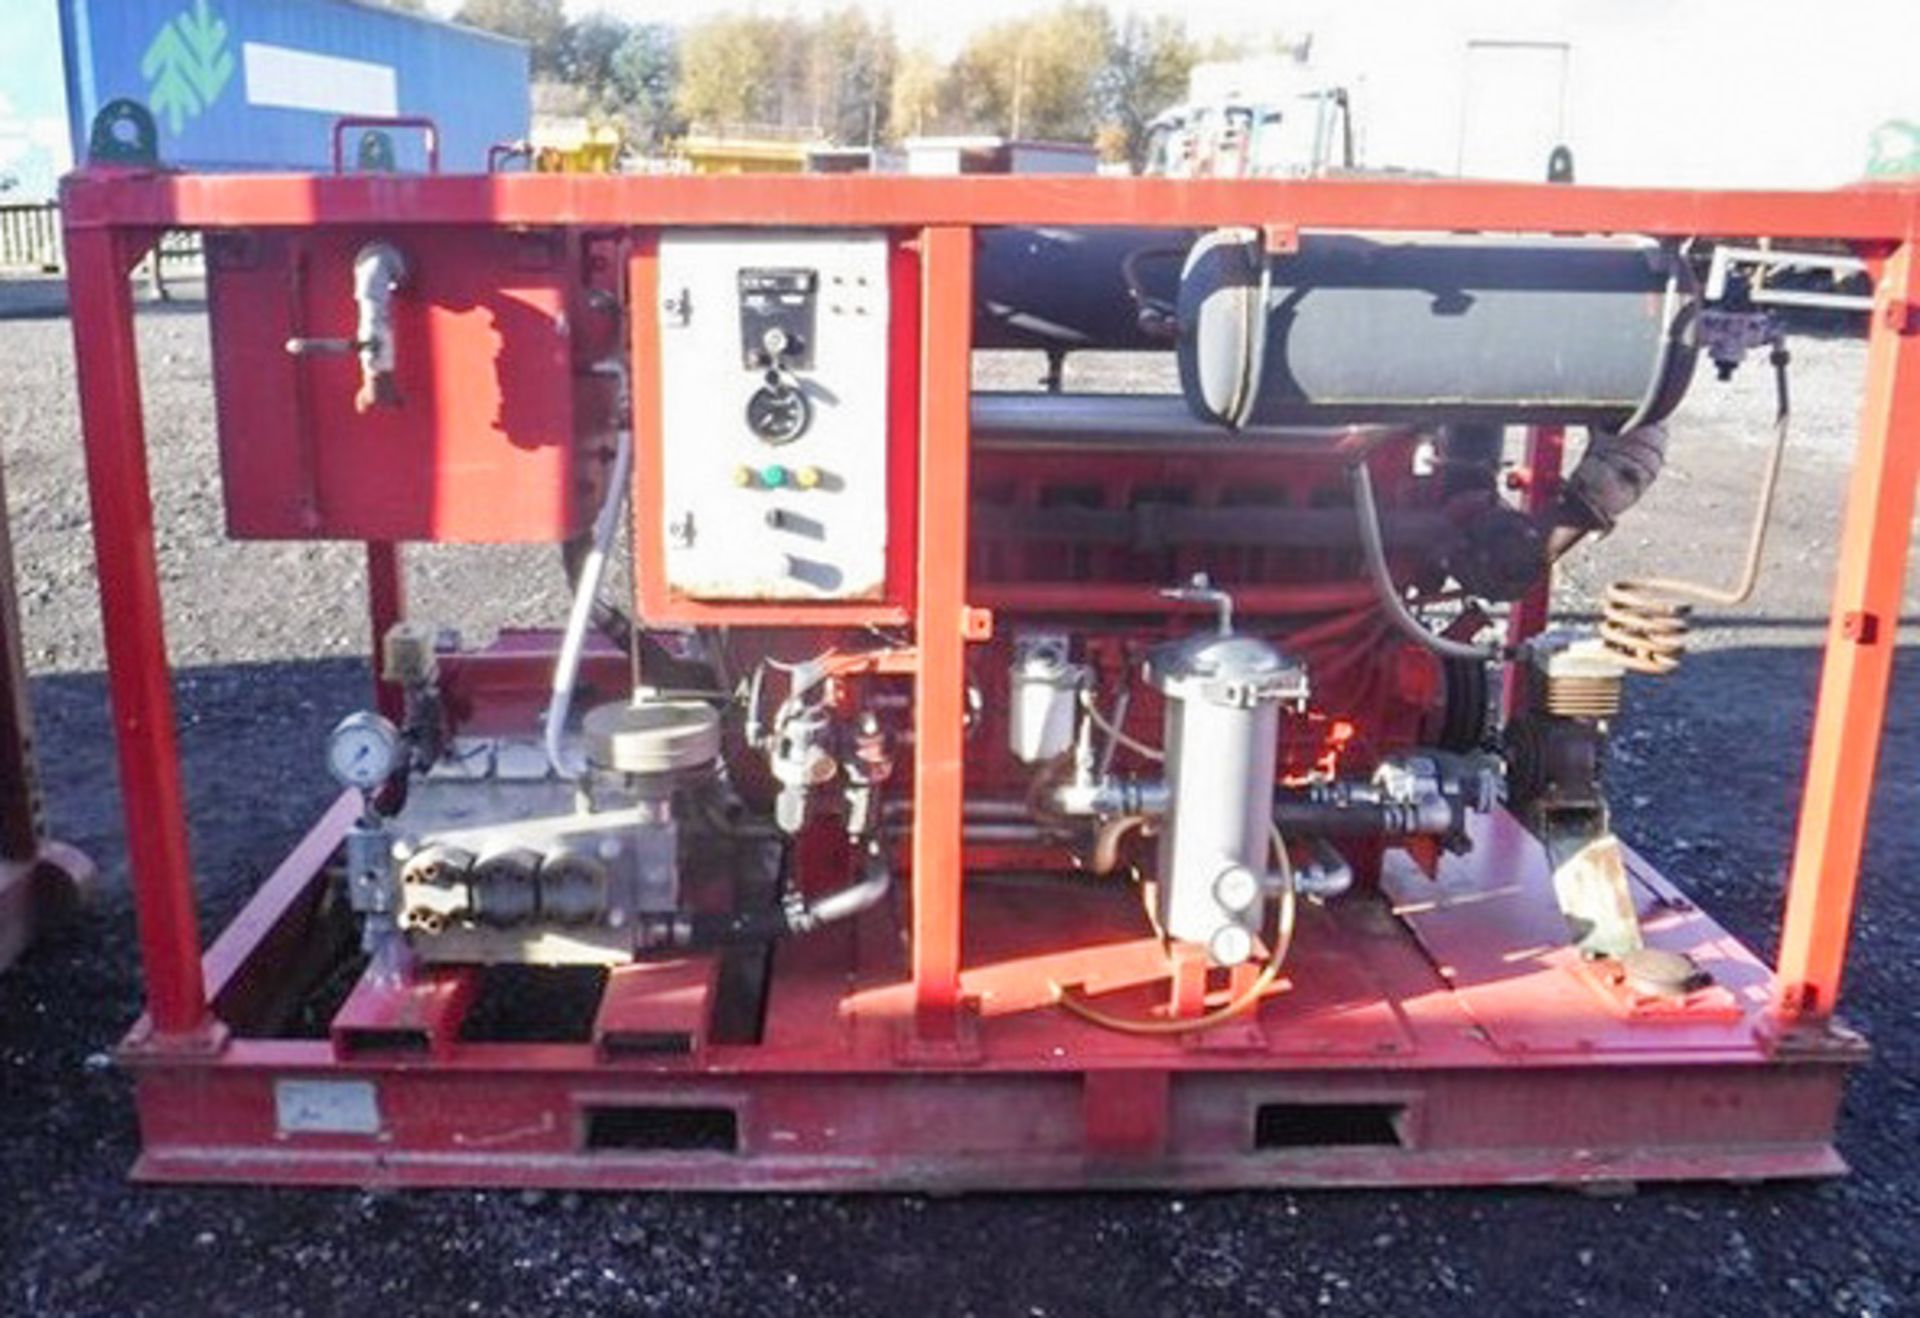 V8 HIGH PRESSURE HYDRAULIC PUMP SKID MOUNTED. (RED), NO PLATES OR ID NUMBERS - Image 2 of 6